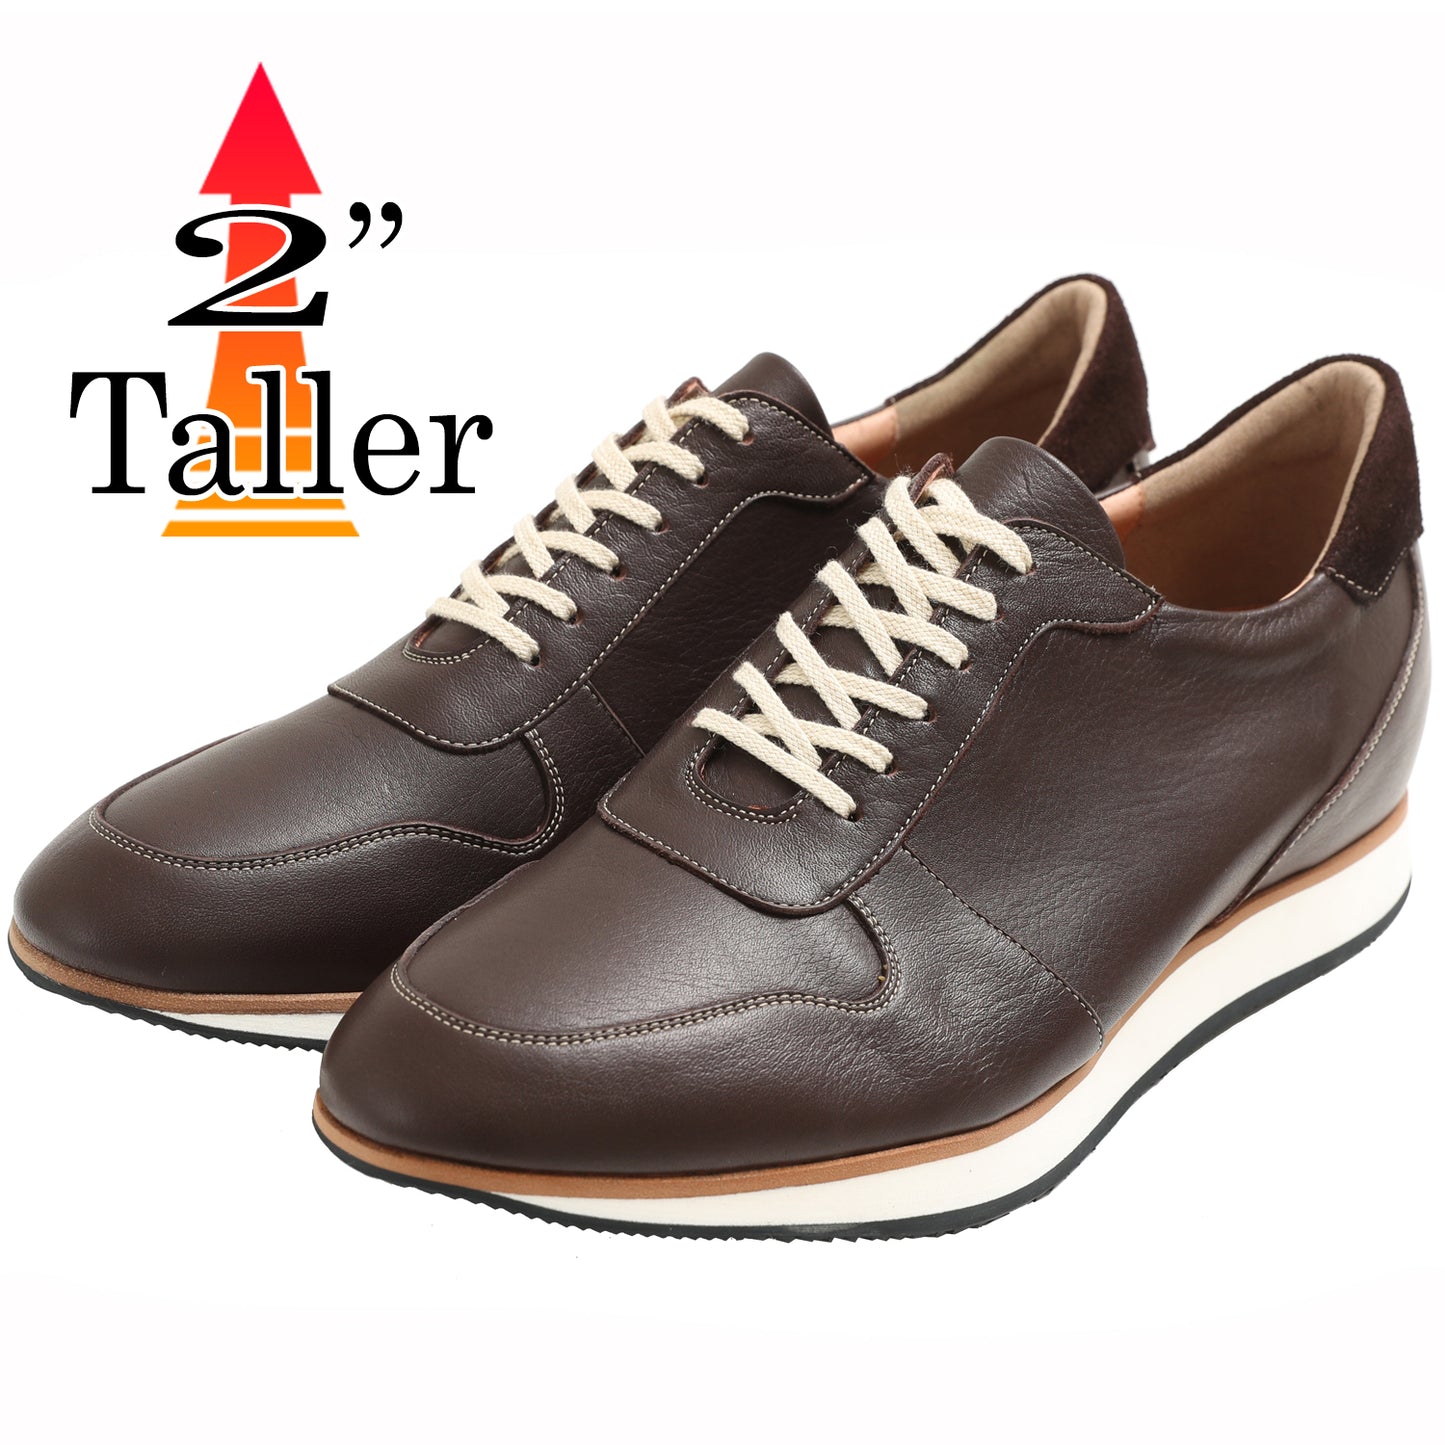 Men's Elevator Shoes Height Increasing 2" Taller Casual Shoes Genuine Leather Fashion Sneaker No. 801